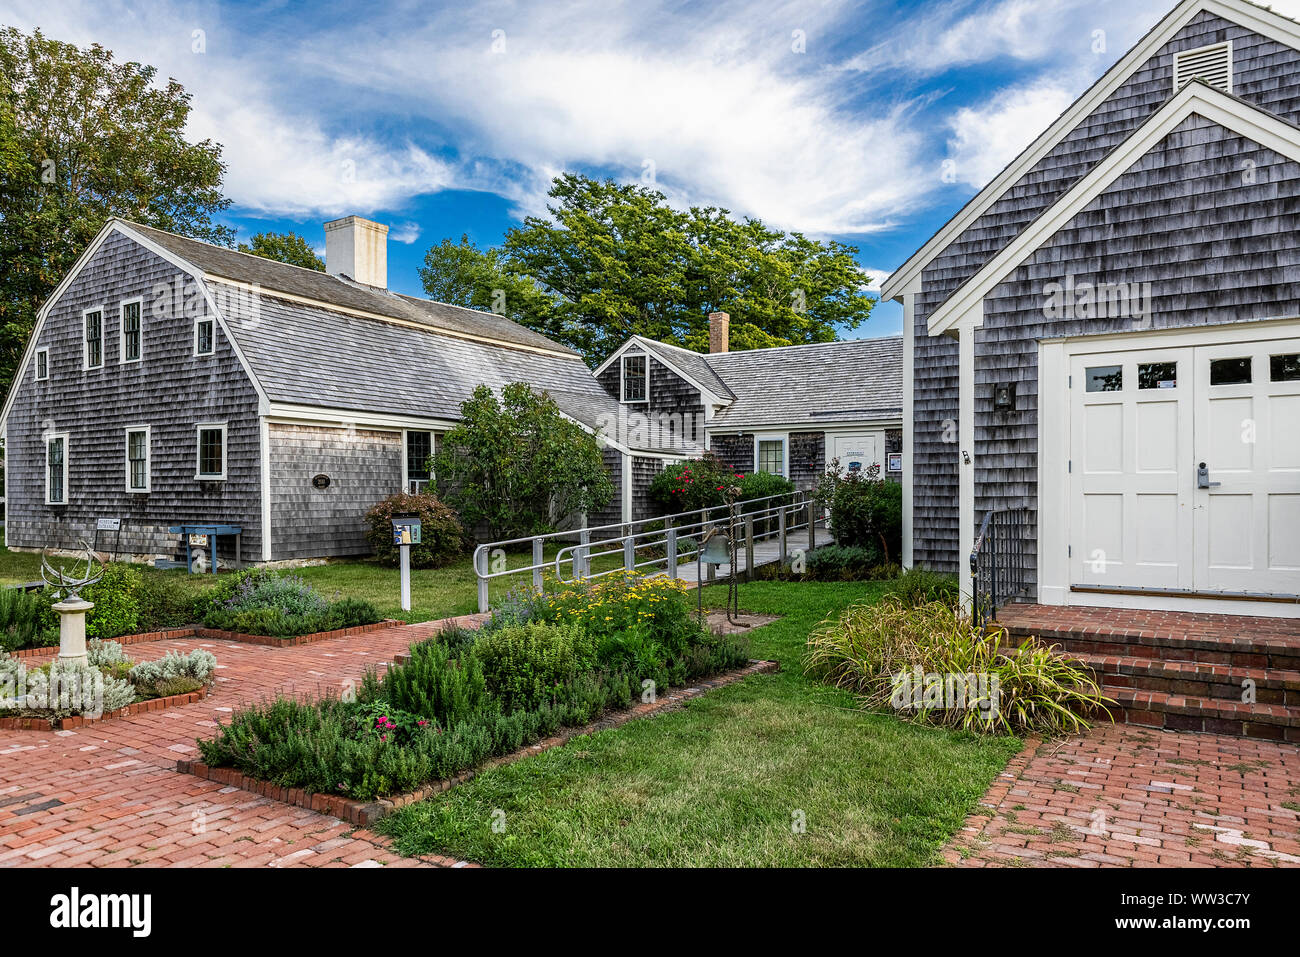 Die Atwood House & Museum, Chatham, Cape Cod, Massachusetts, USA. Stockfoto